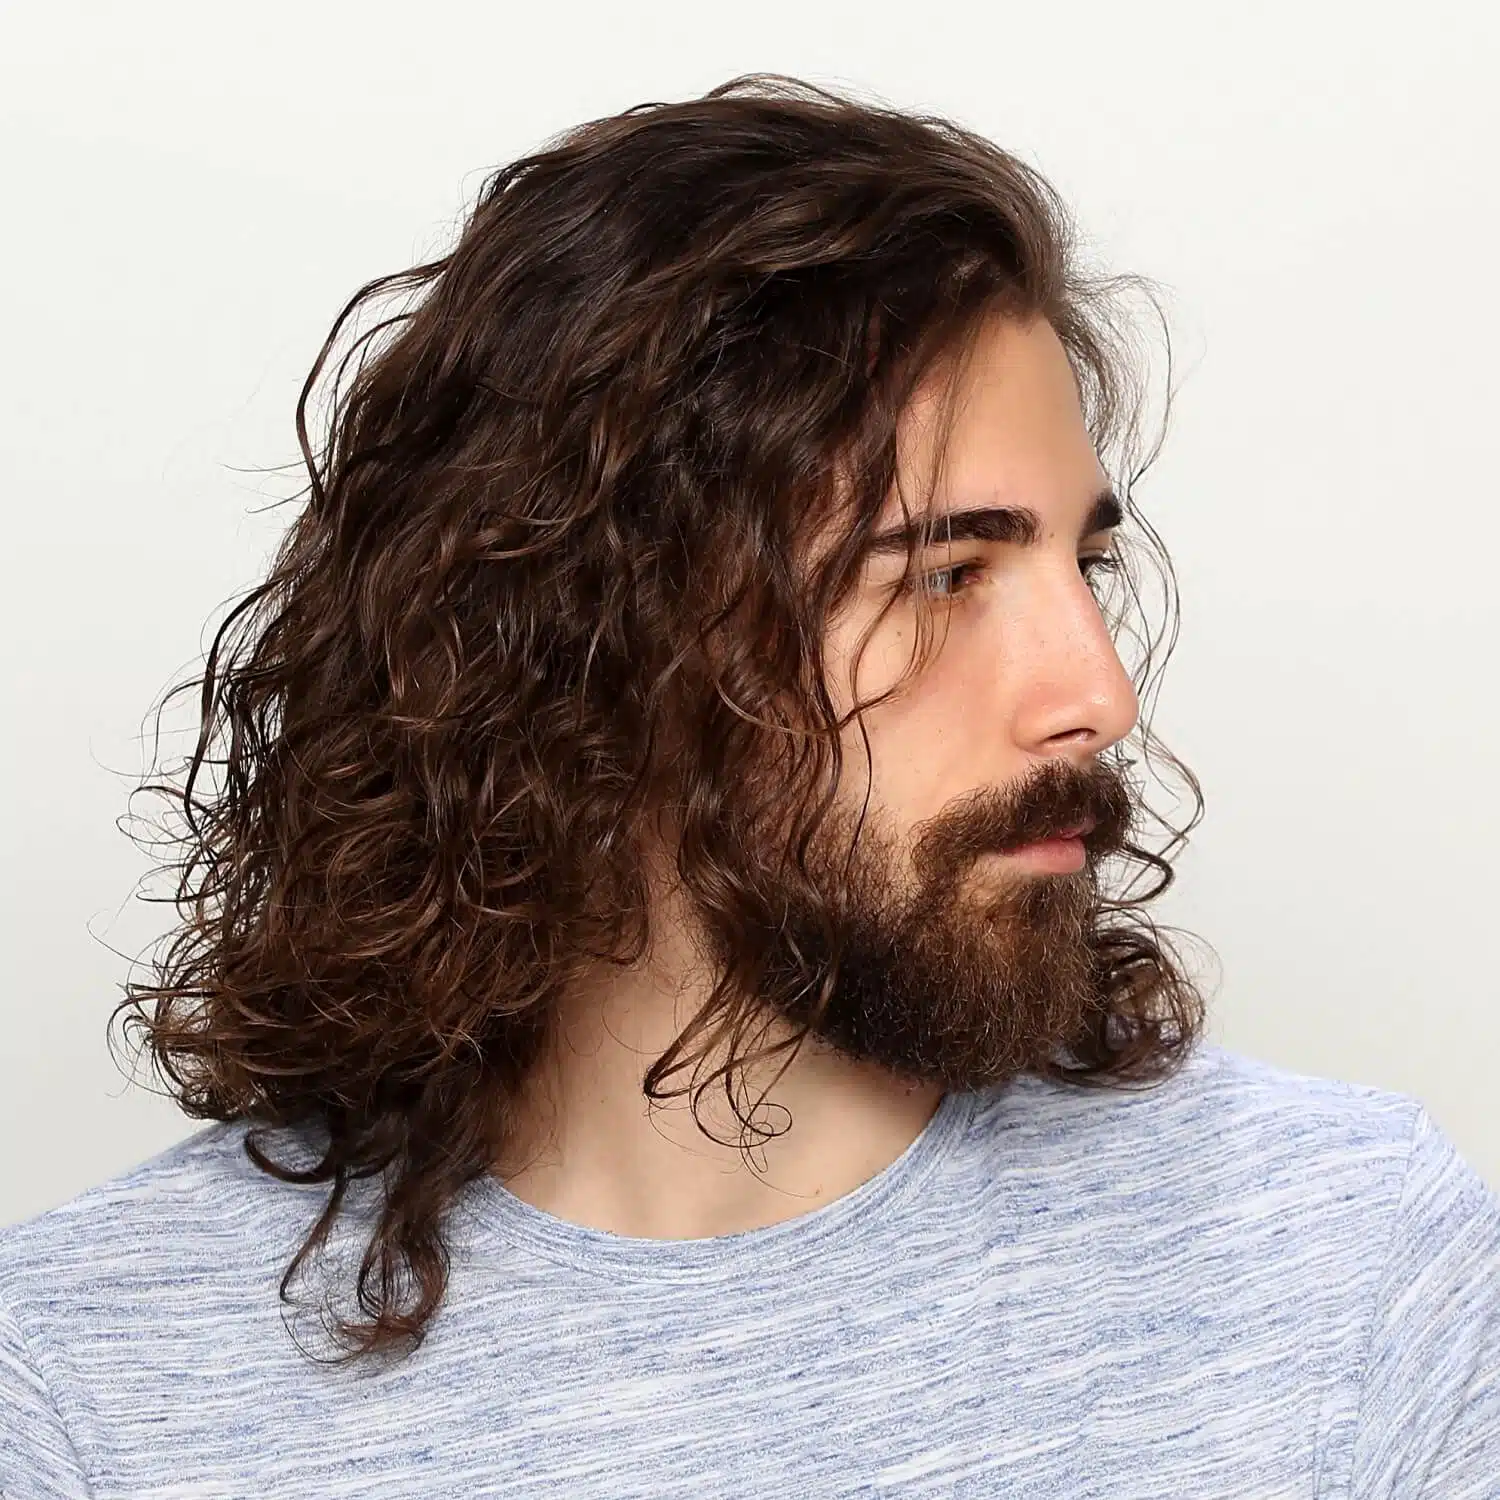 10 Cool Longer Hairstyles for Men - The Modest Man